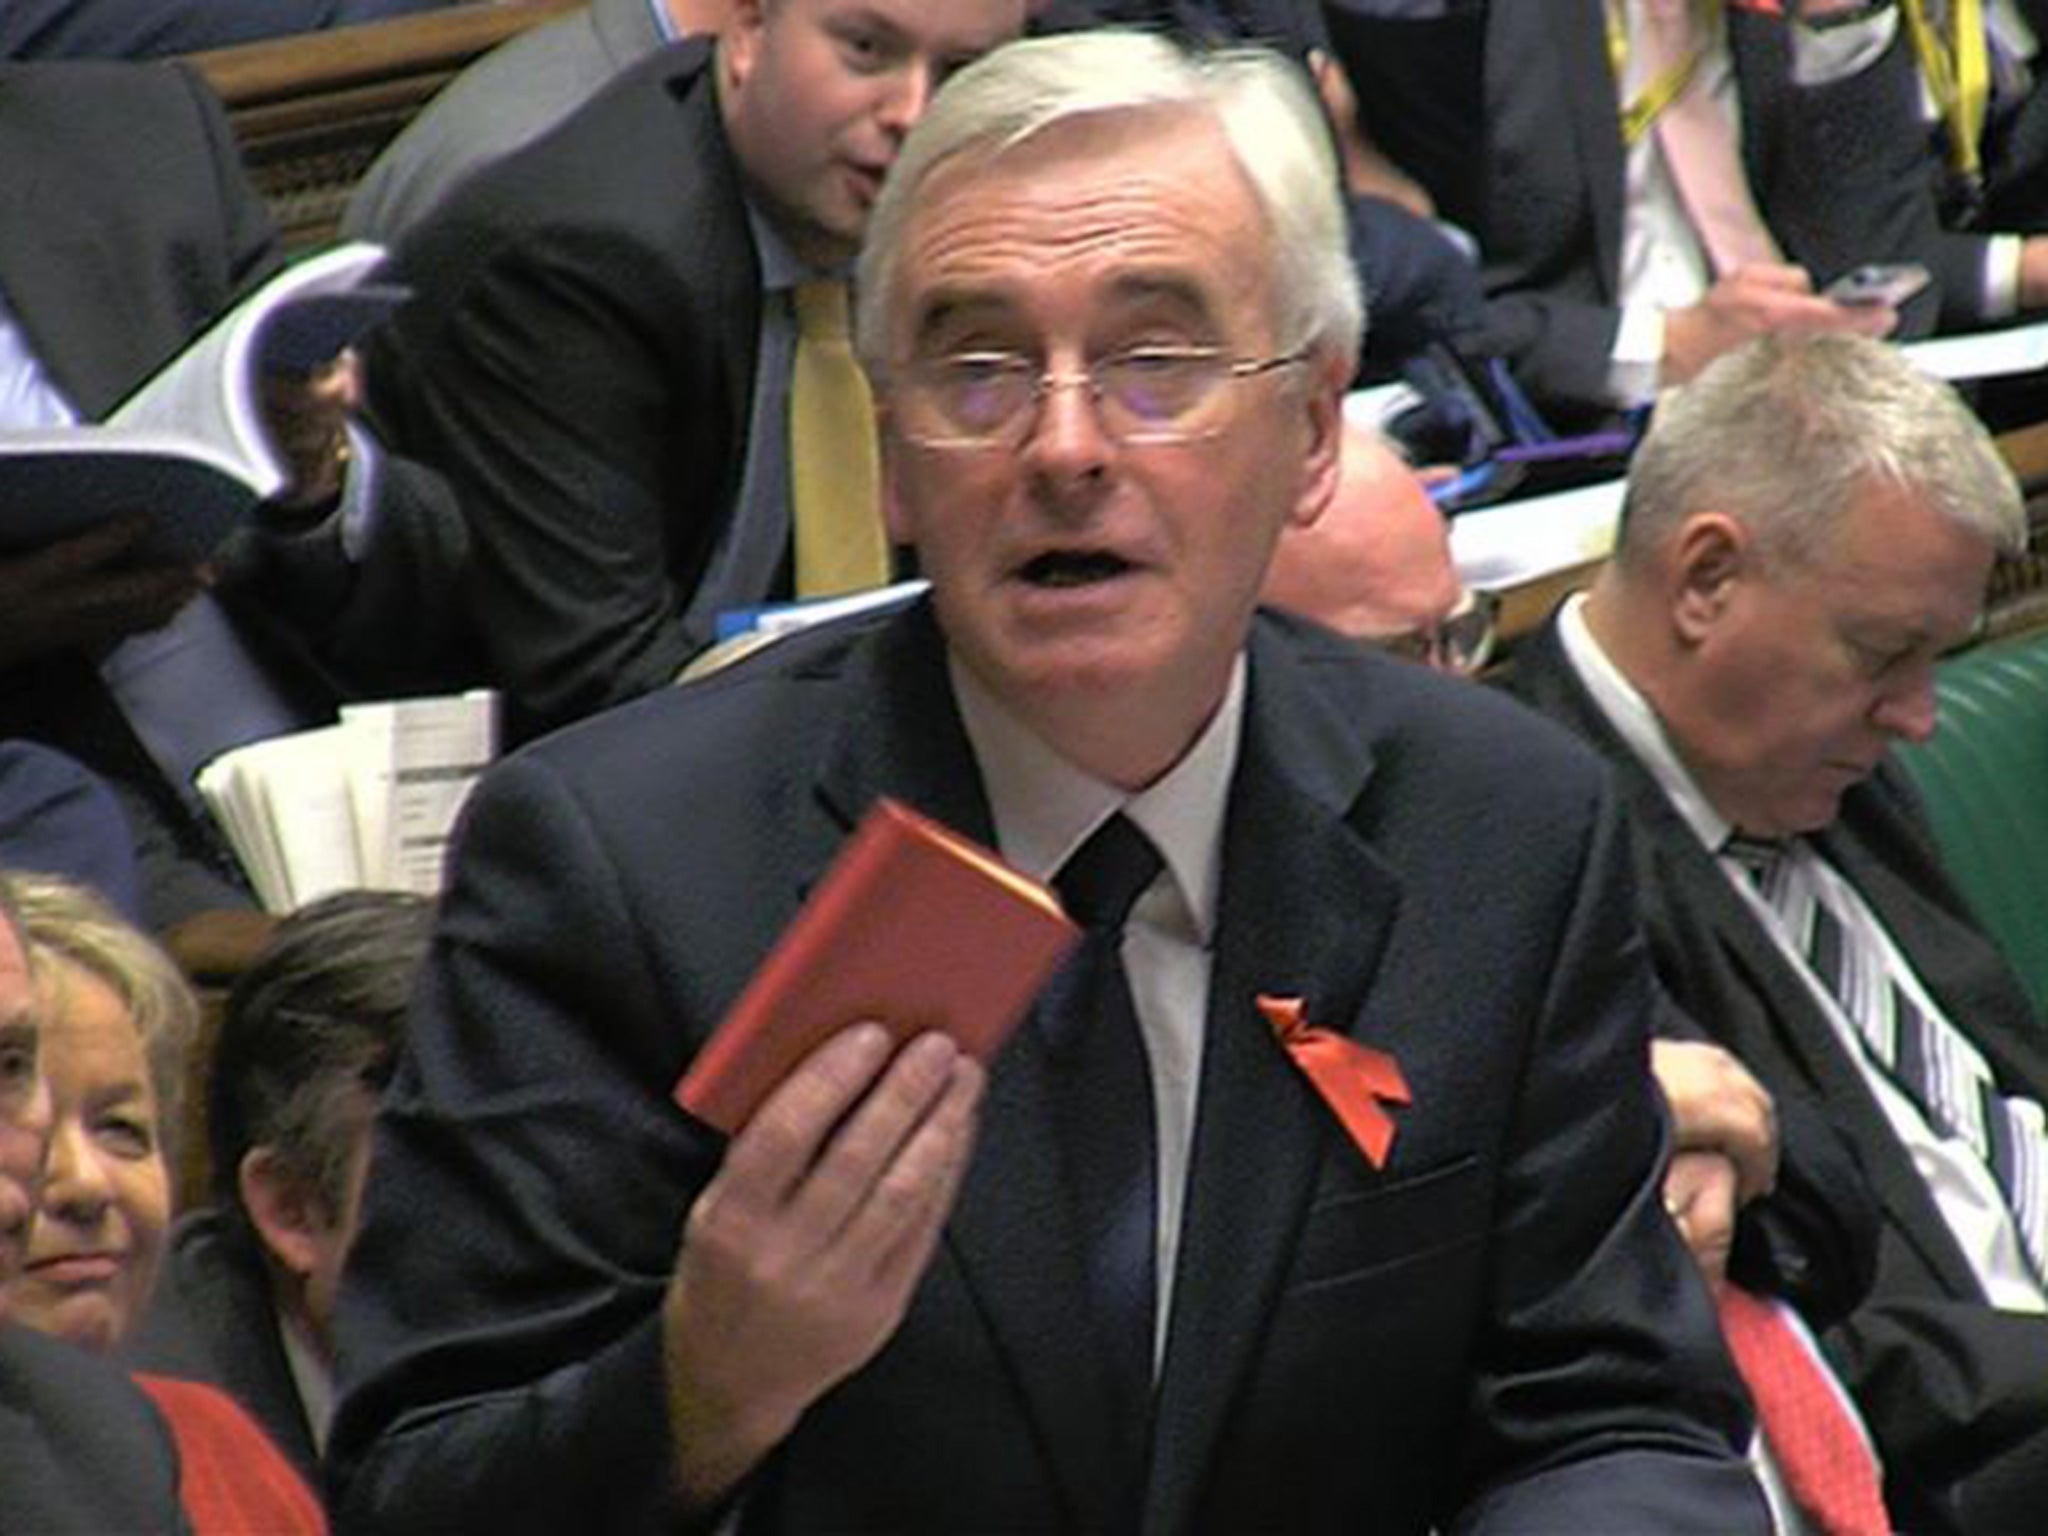 Britain's shadow Chancellor of the Exchequer John McDonnell quoting from Mao's Little Red Book, after Chanceller George Osborne's delivery of the Autumn Statement